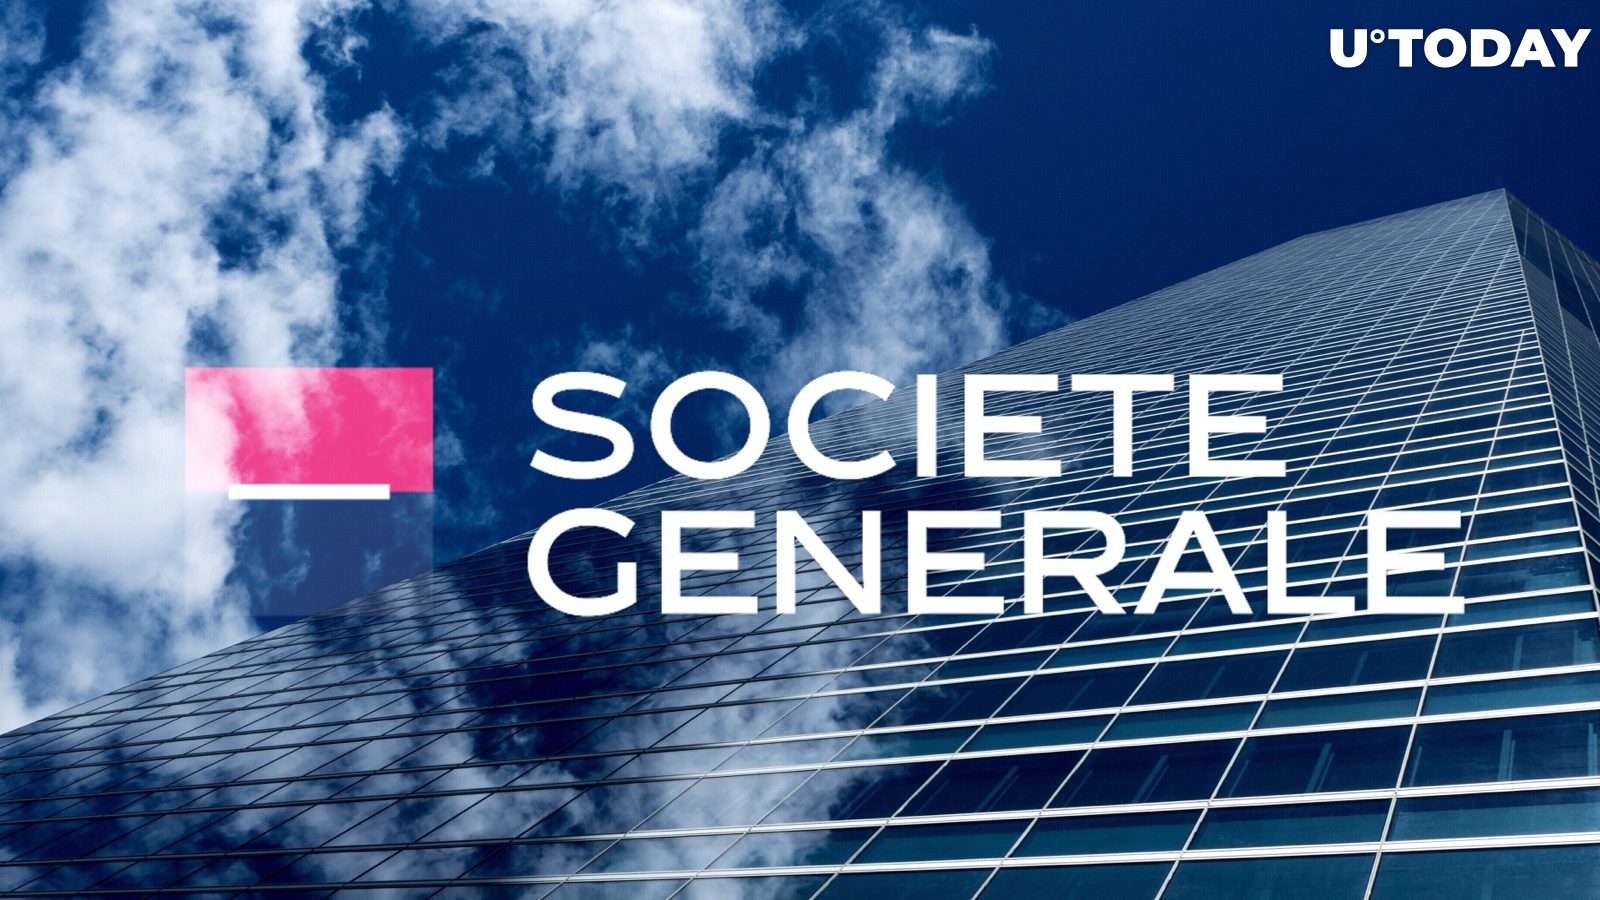 ETH-Based Tokenized Bonds for $112 Mln Issued on Blockchain by Societe Generale, Moody’s Greenlights the Experiment